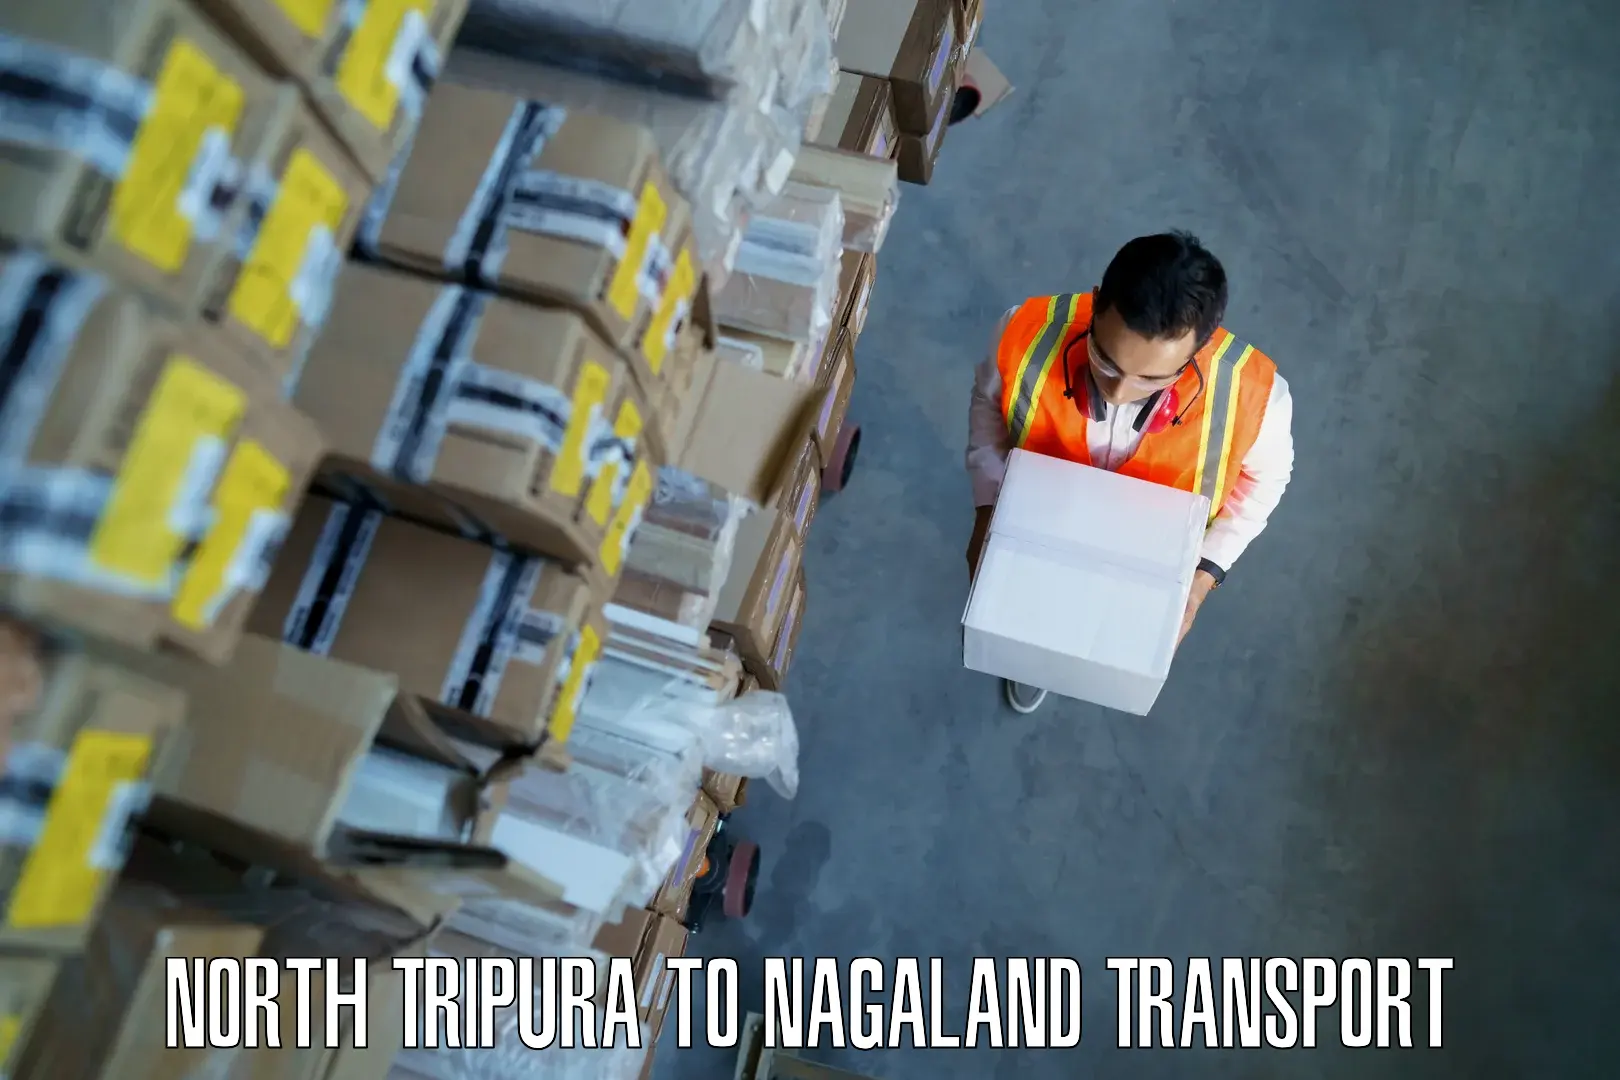 Commercial transport service North Tripura to Nagaland